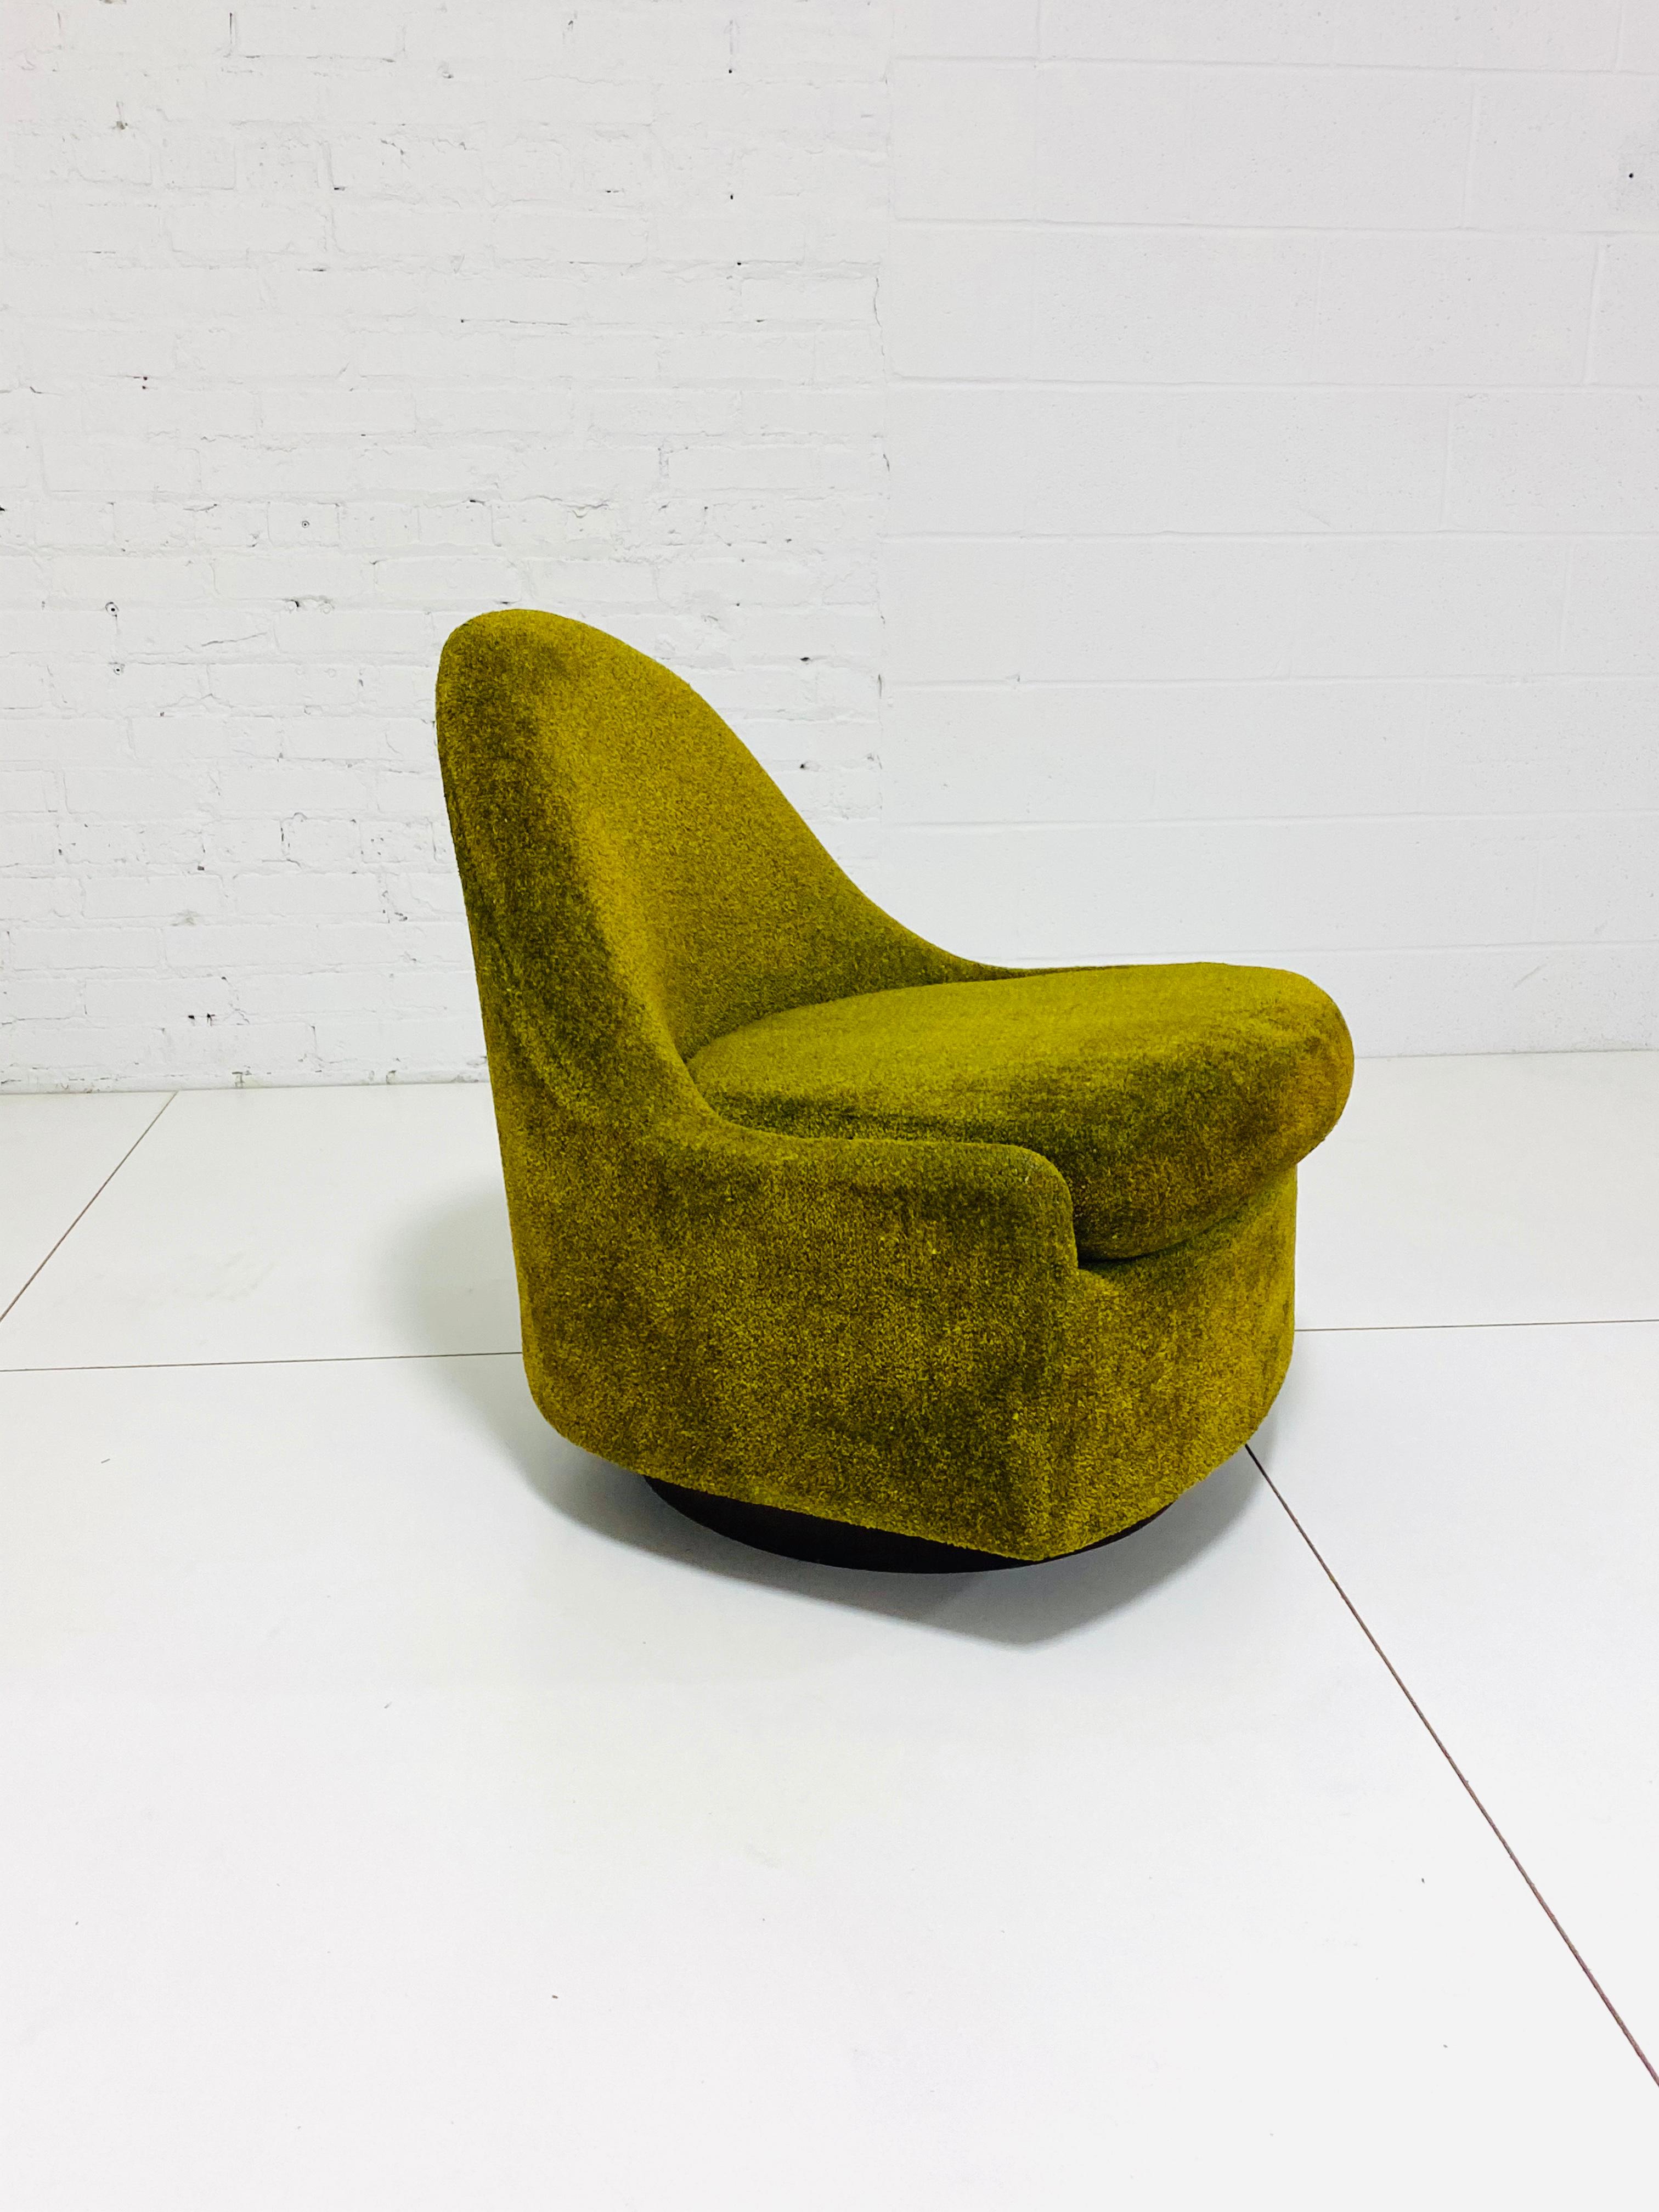 Teardrop shape lounge chair by Milo Baughman. Unique petite form perfectly Contours body. Chair swivels and rocks.